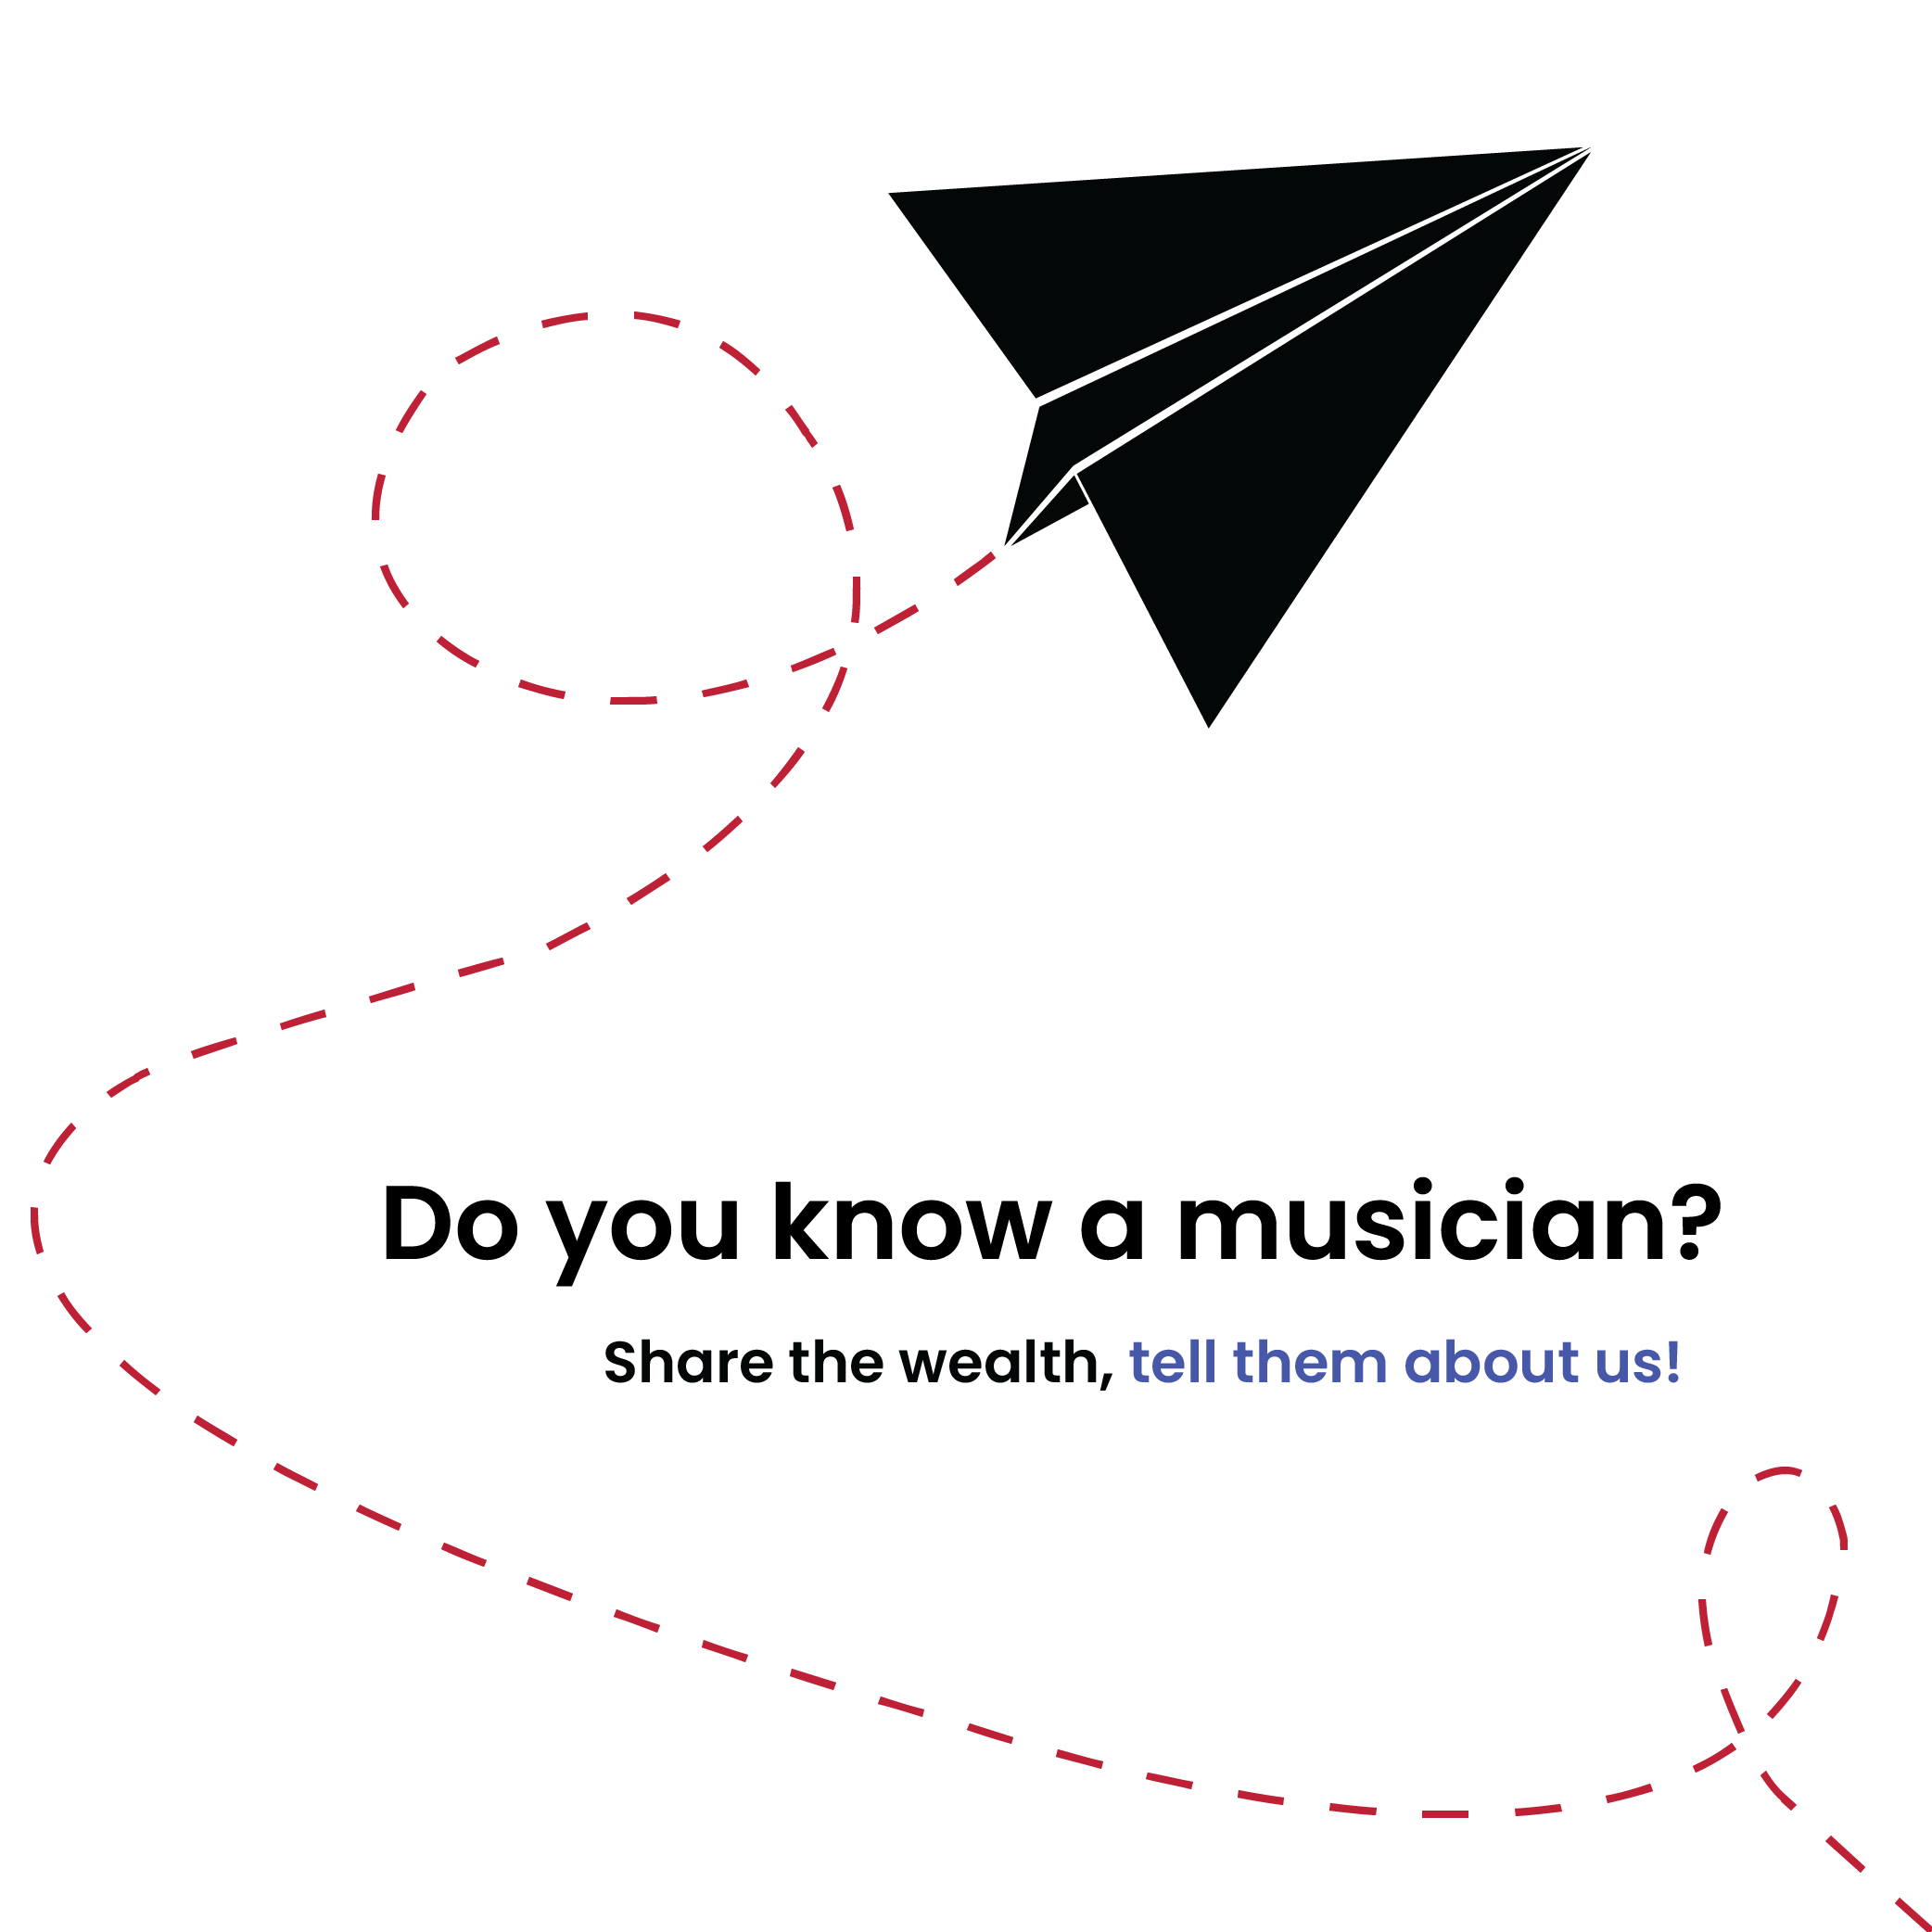 Do you know a musician? Tell them about us